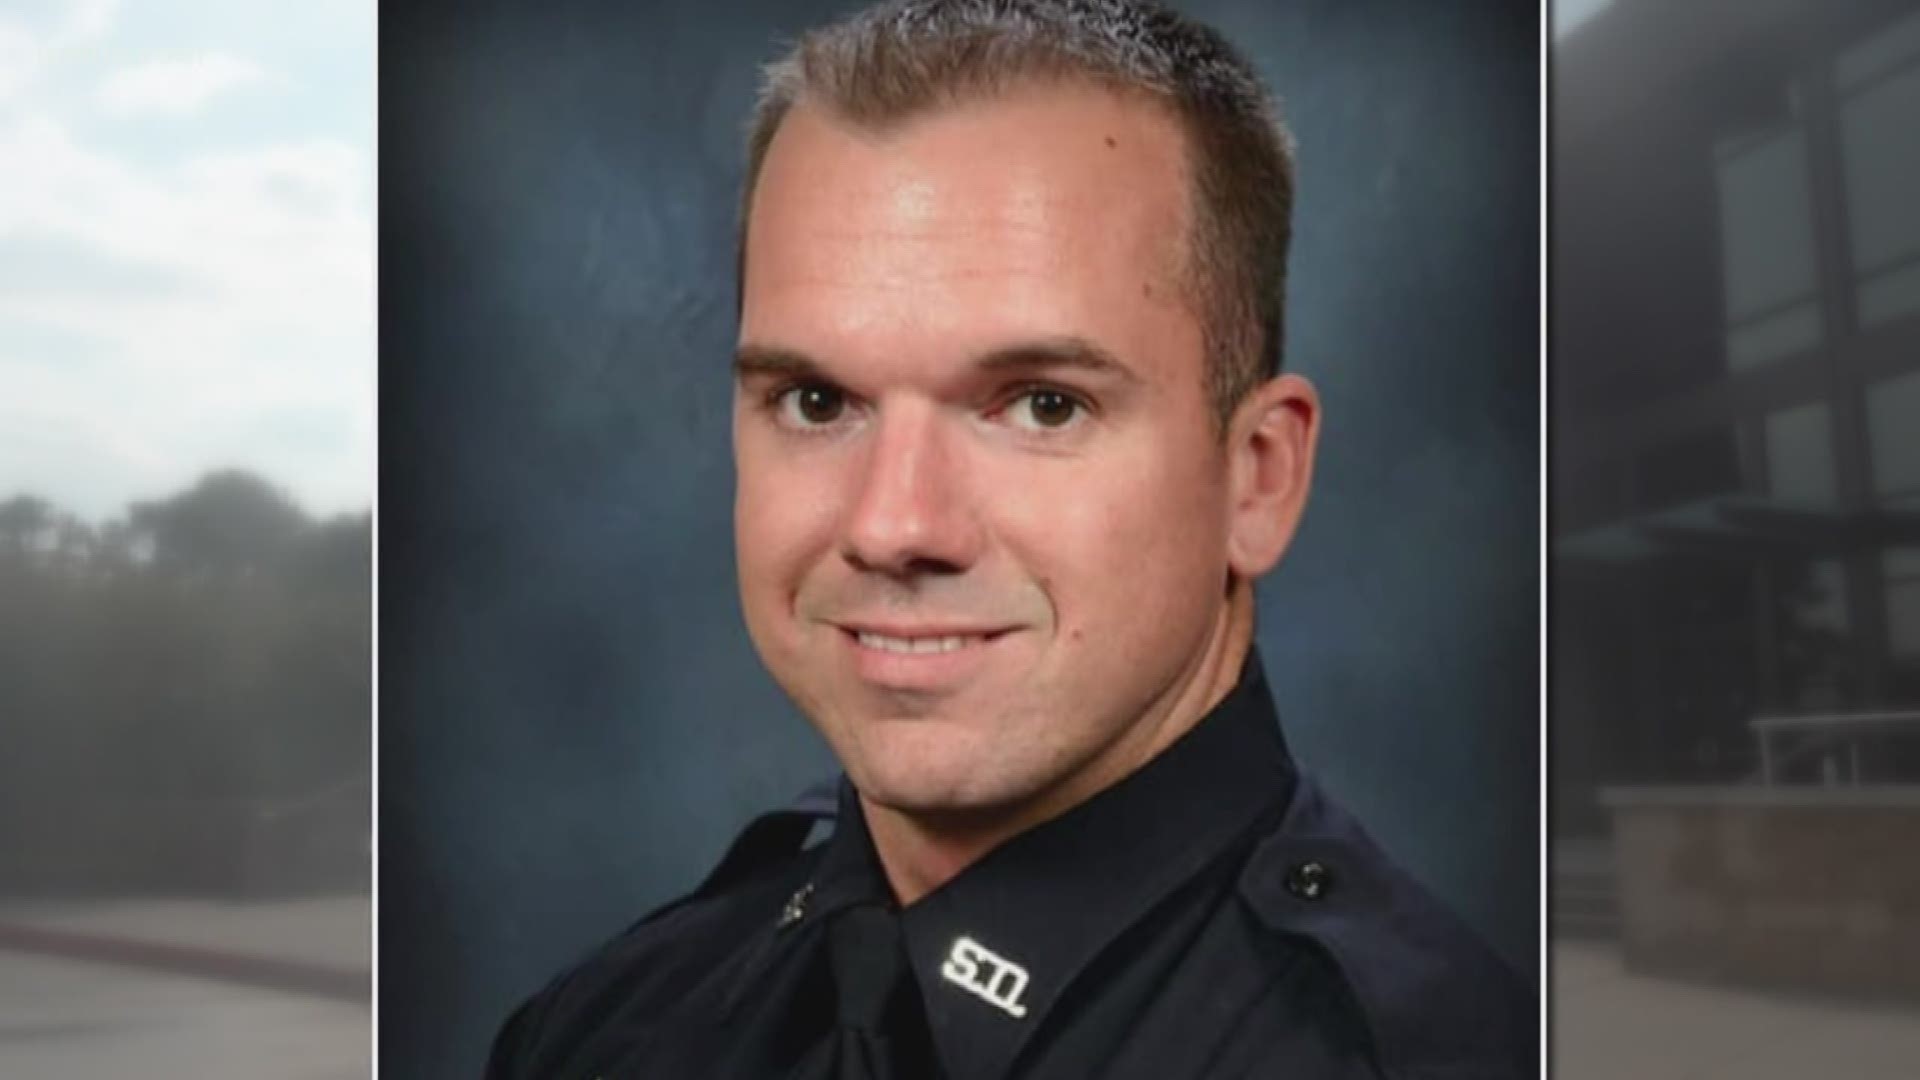 "The best fiance, brother, friend, son, and officer. The most selfless person you would ever meet with a heart of gold. He would give anyone the shirt off his back," his fiancée said.